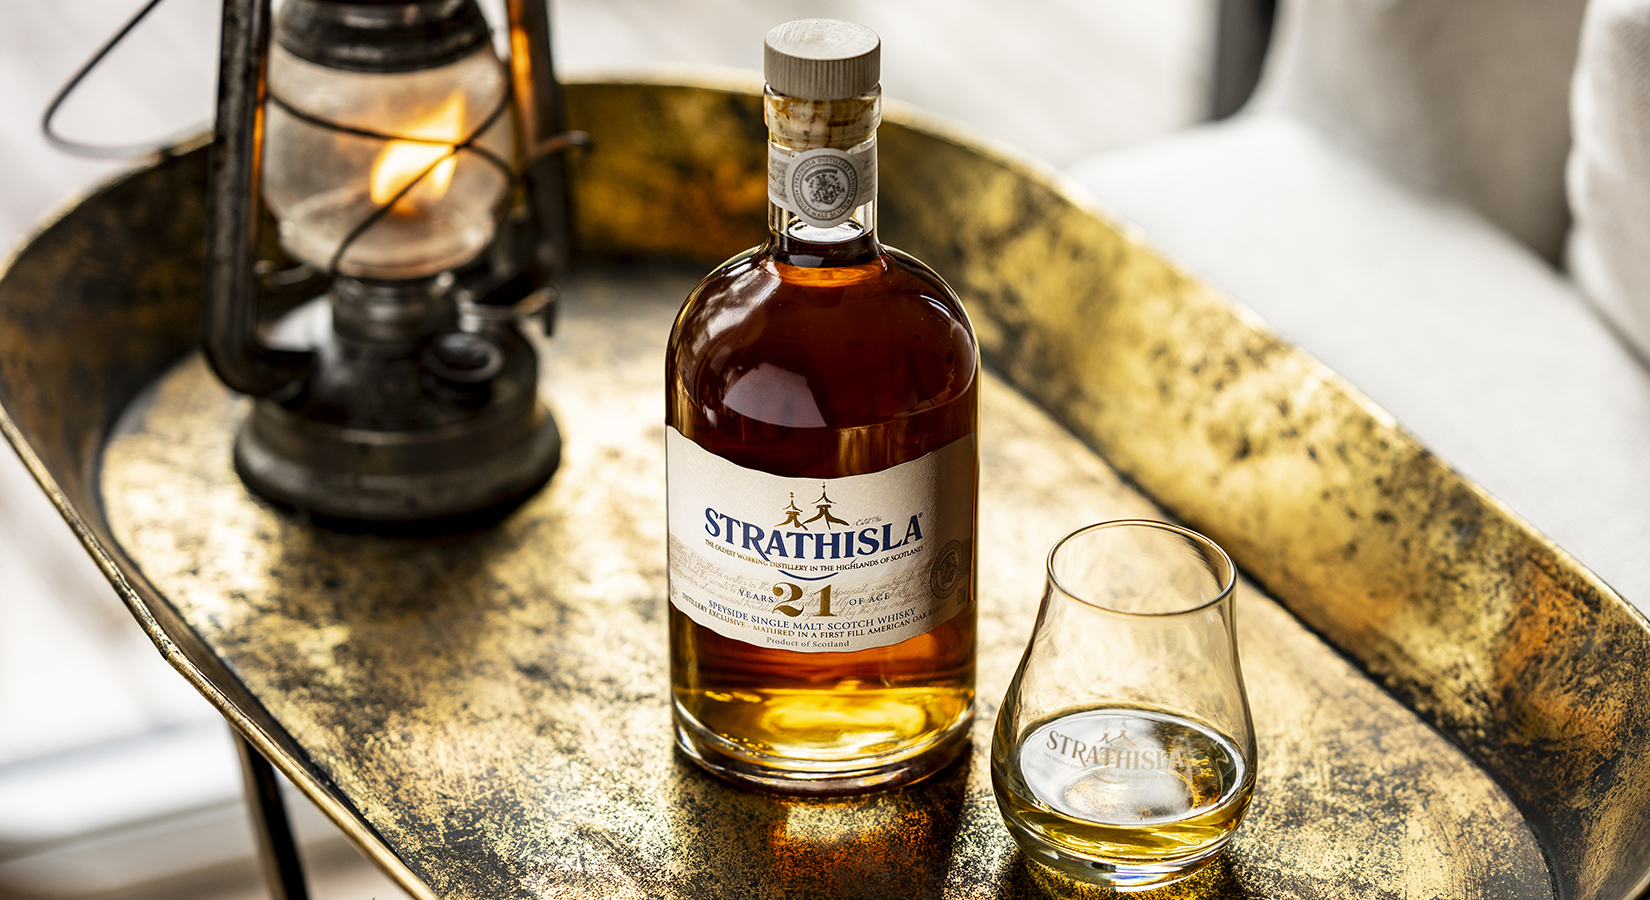 Strathisla 21 Year Old Poured in Whisky Glass